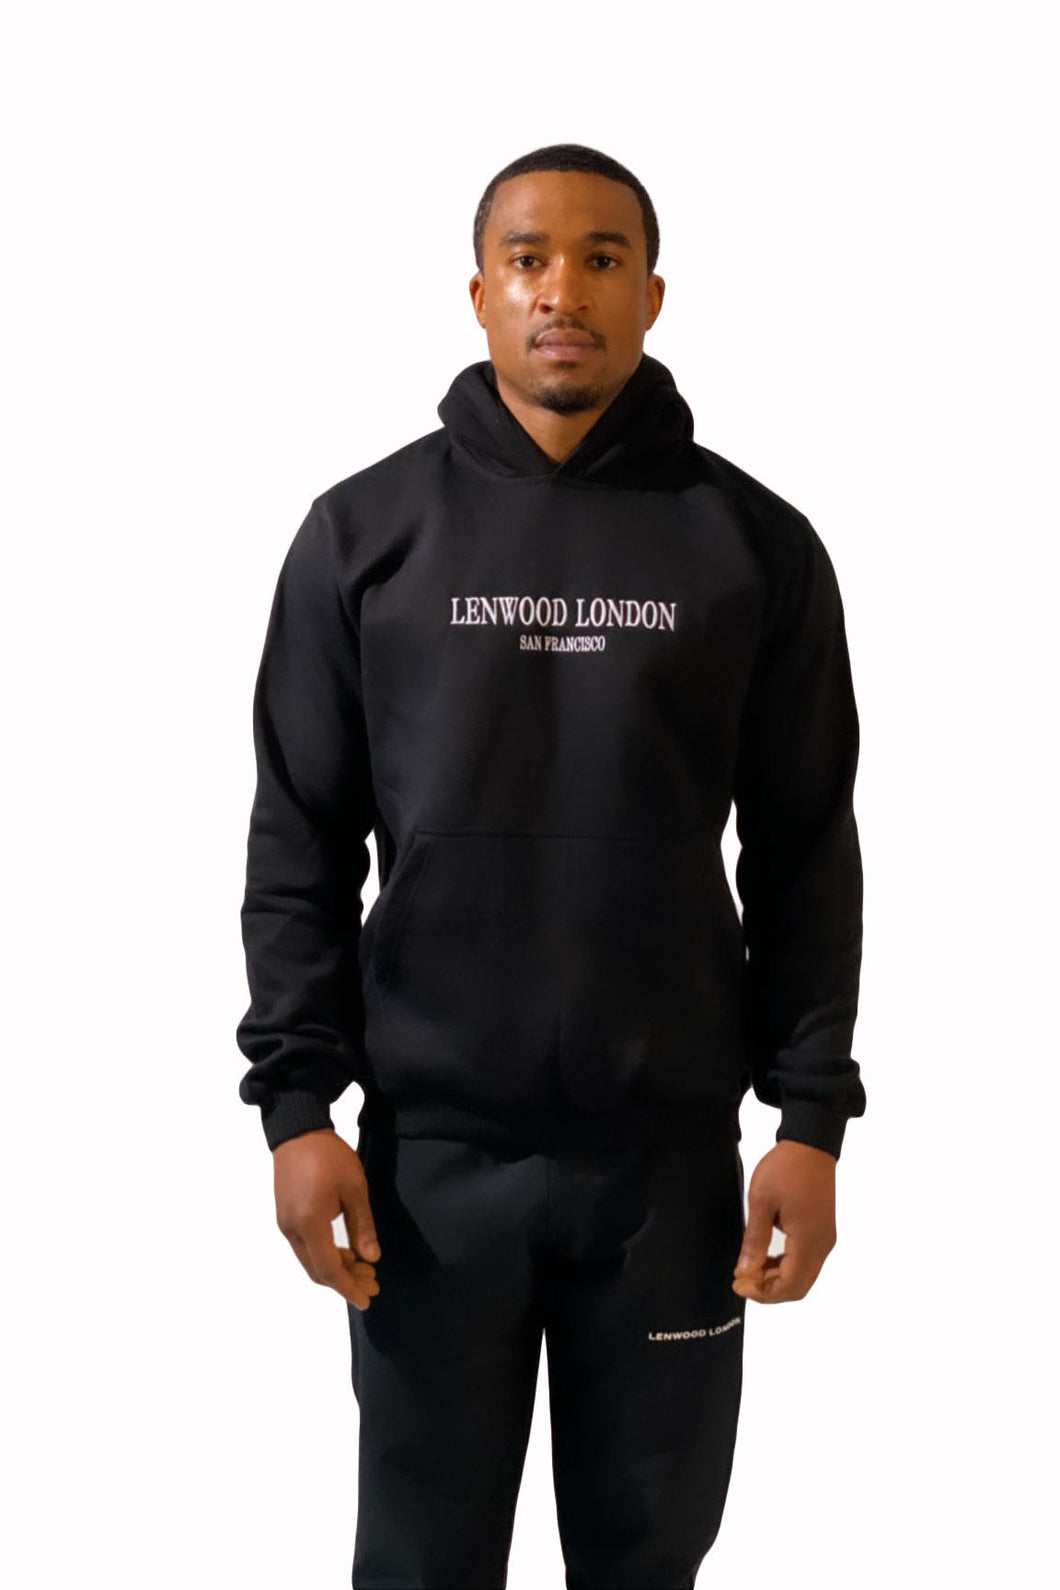 LENWOOD LONDON WHITE EMBROIDERED HOODIE